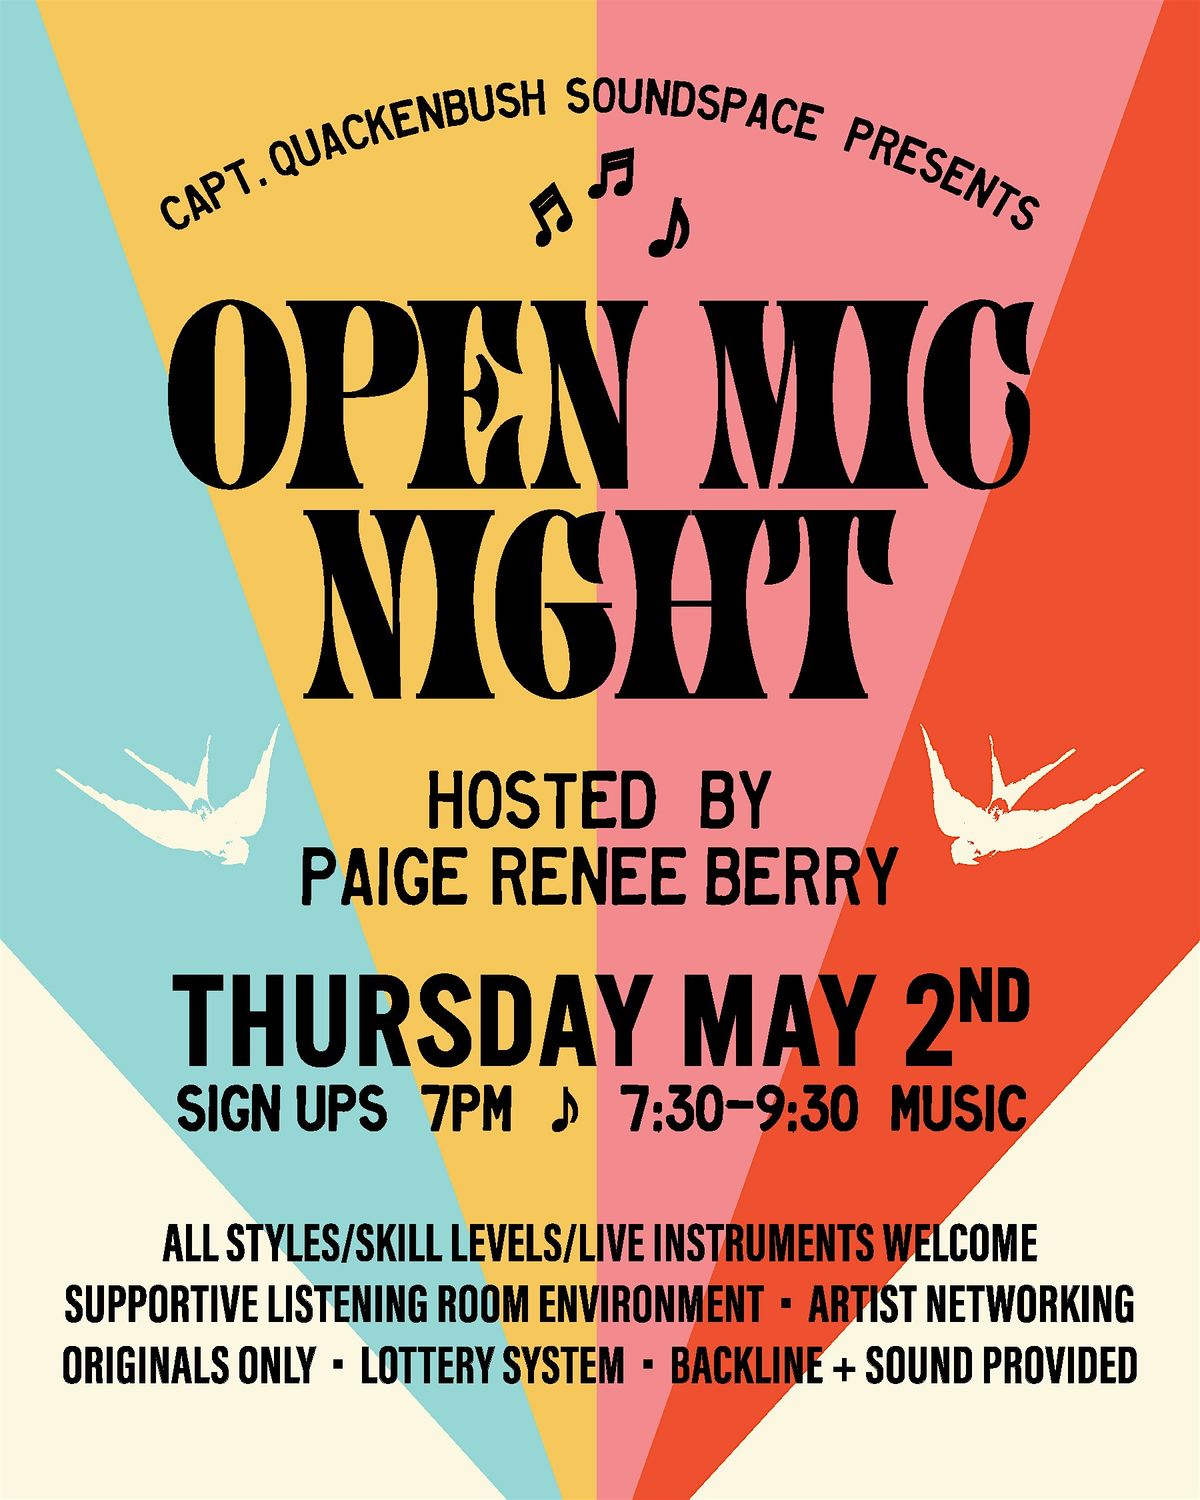 Open Mic Night Hosted by Paige Renee Berry